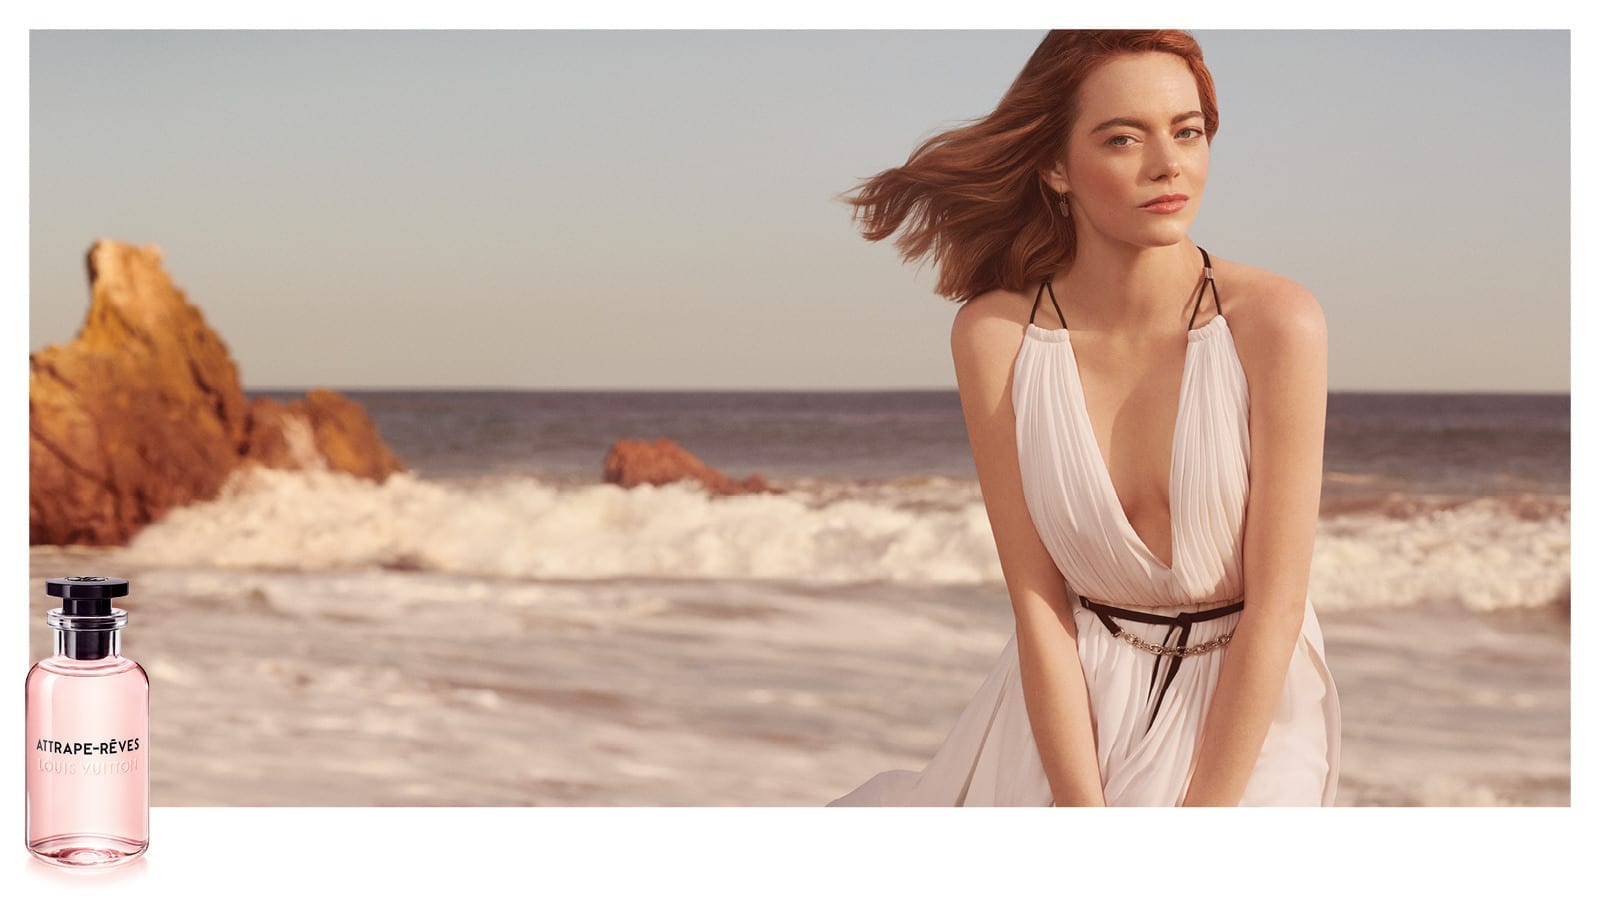 Louis Vuitton: Attrape-Reves features Emma Stone - DAILY COMMERCIALS